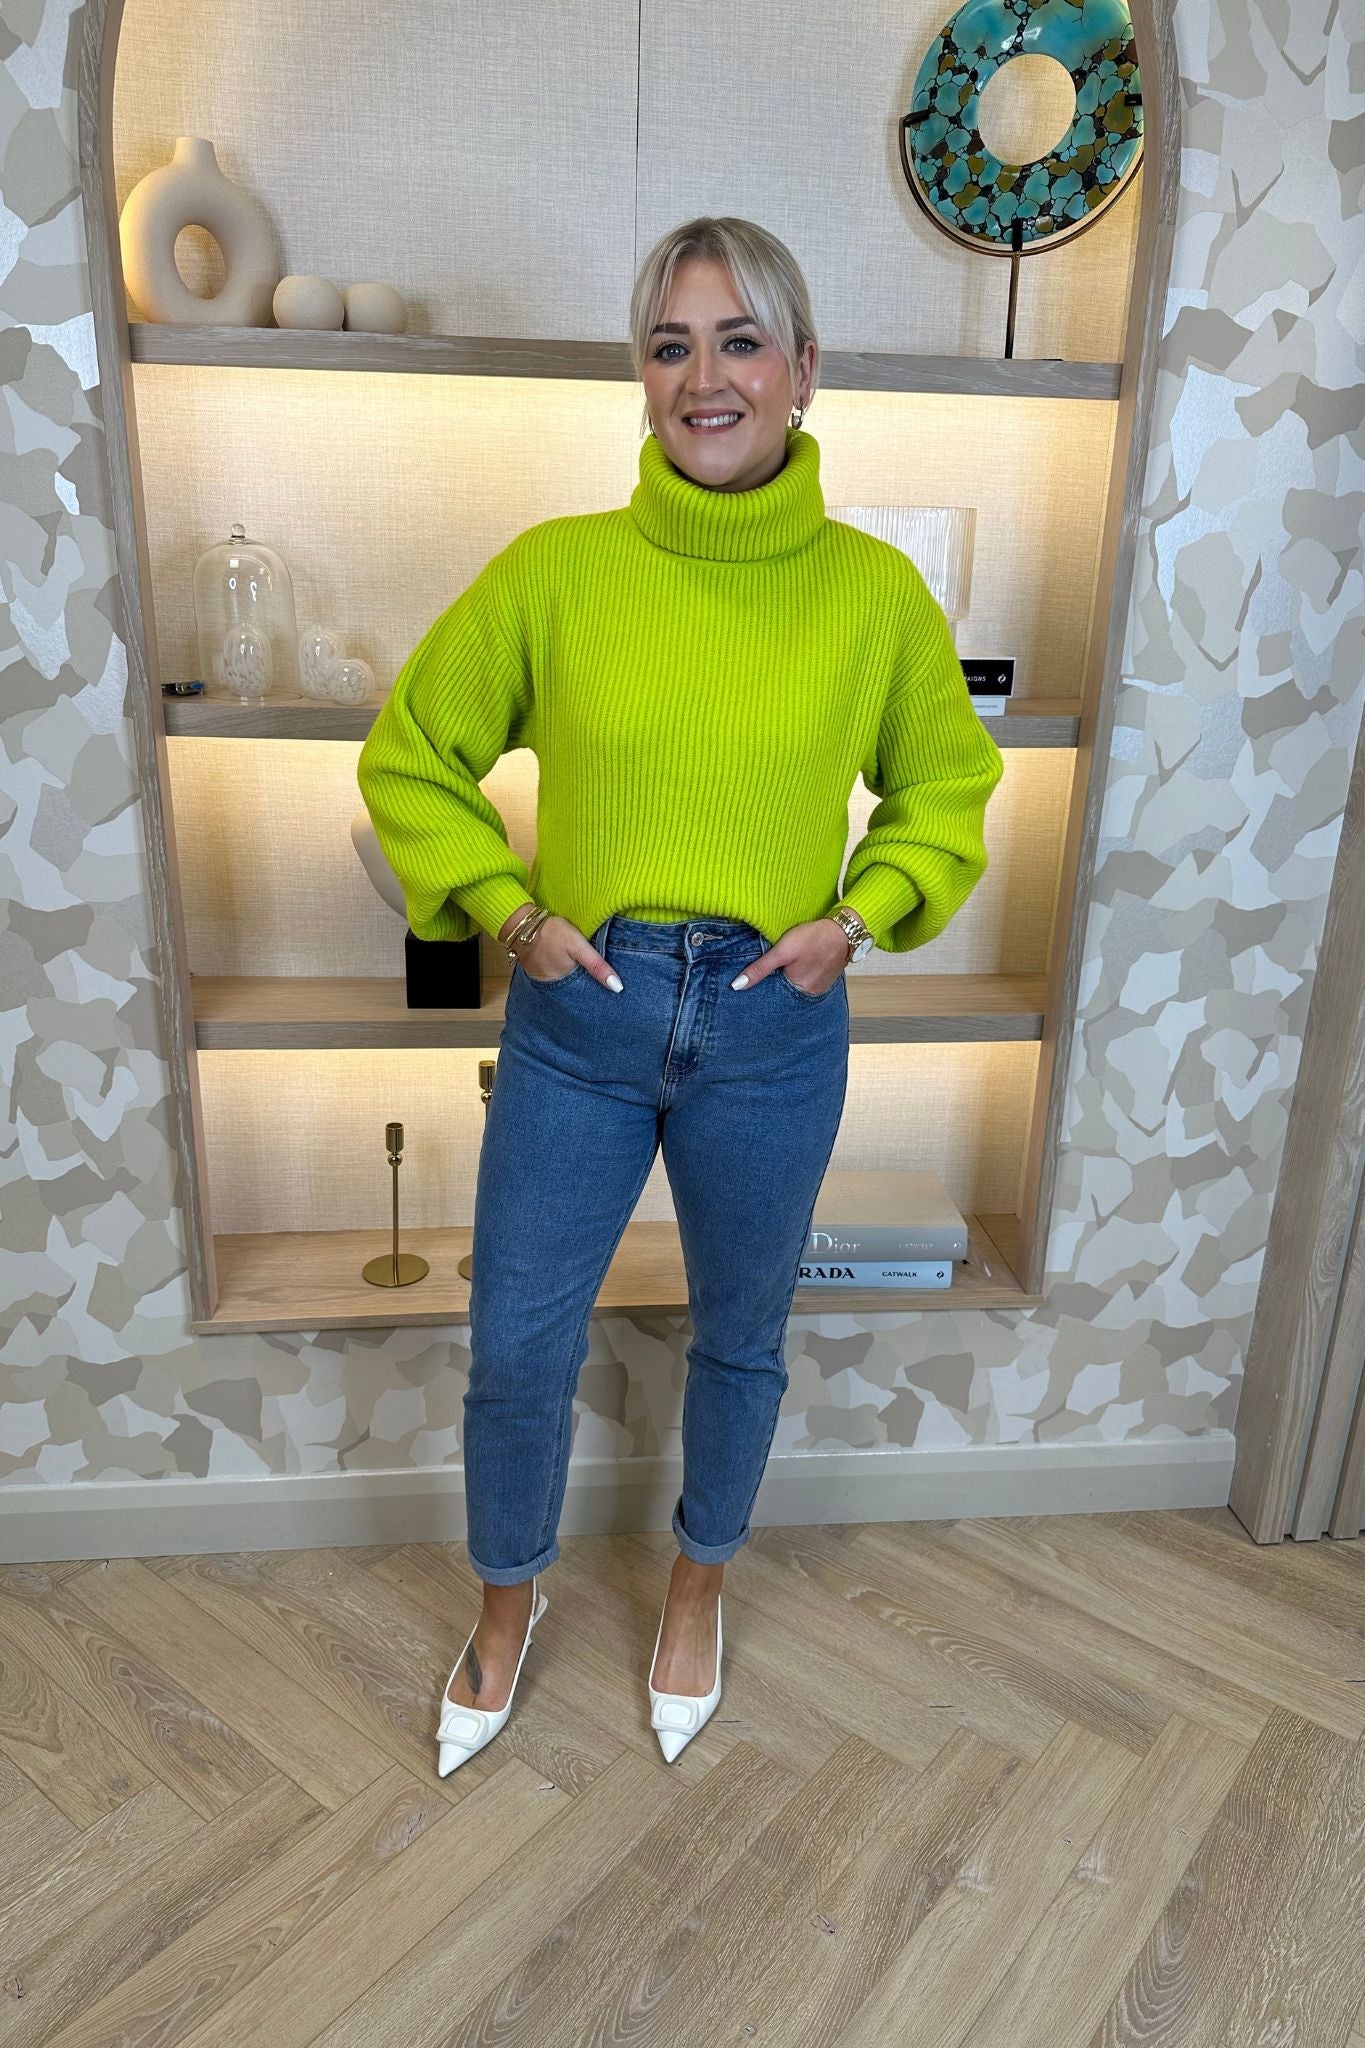 Sarah Polo Neck Jumper In Lime - The Walk in Wardrobe